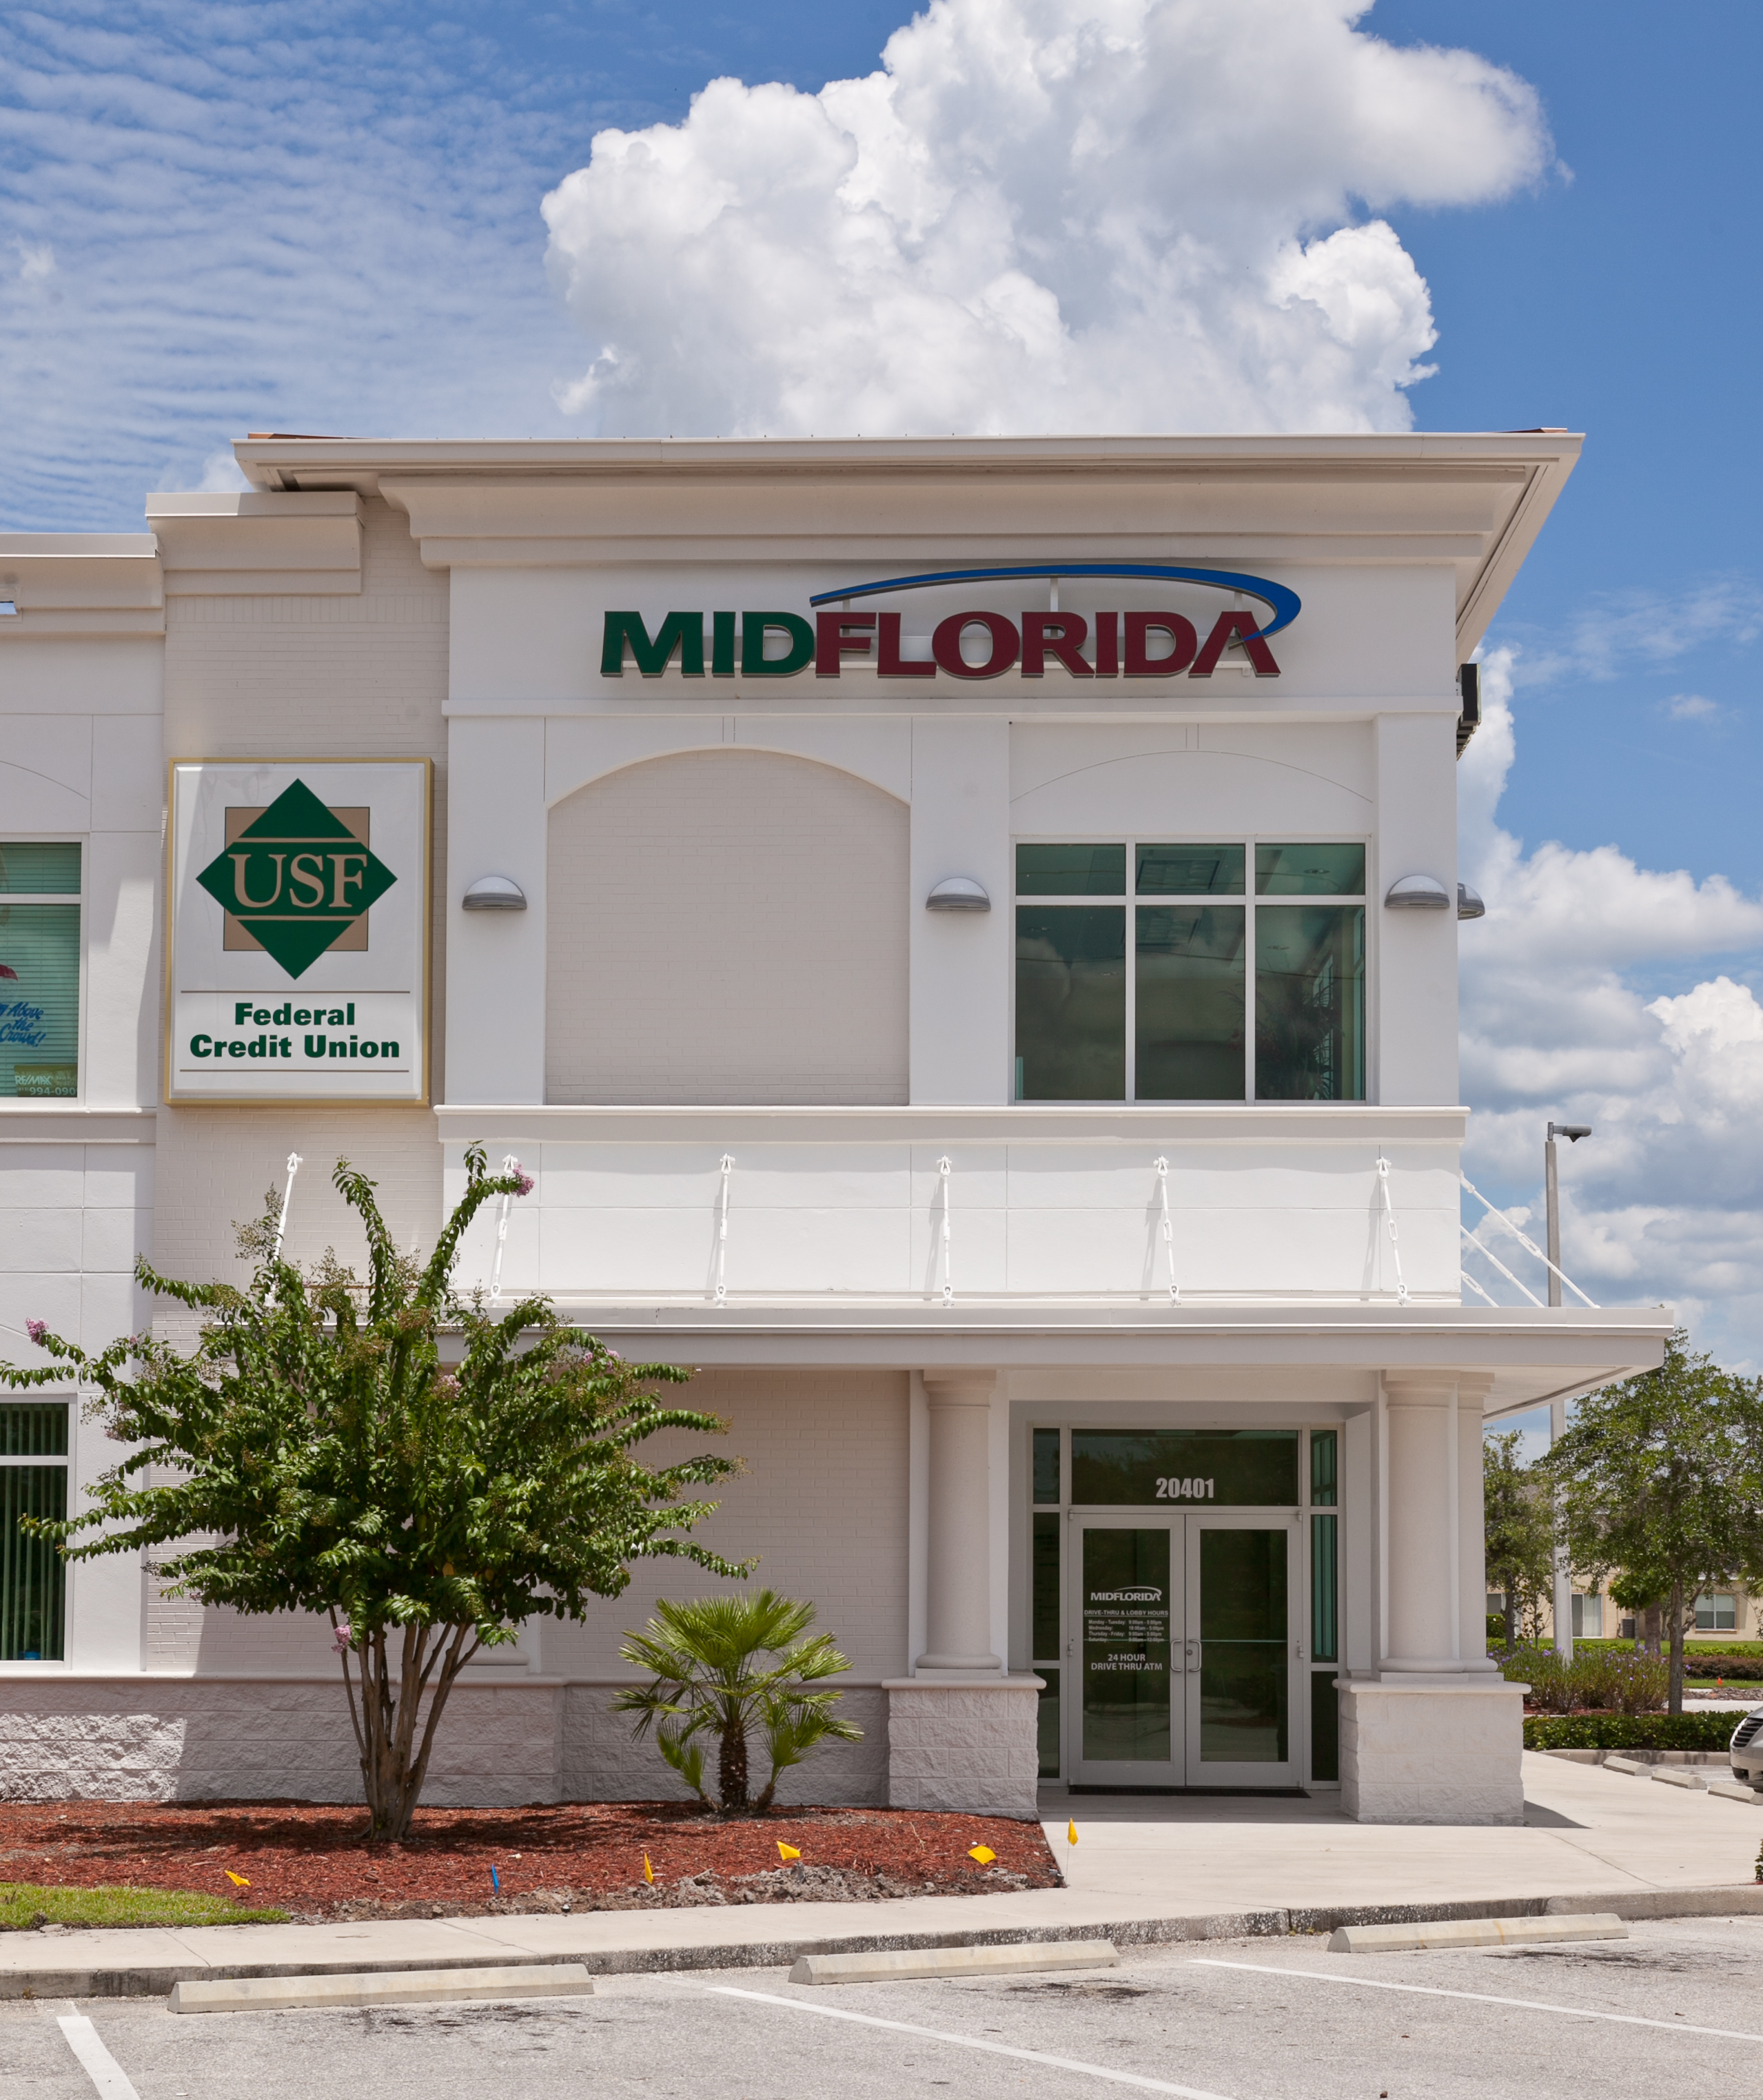 MIDFLORIDA Credit Union Coupons near me in Tampa, FL 33647 | 8coupons